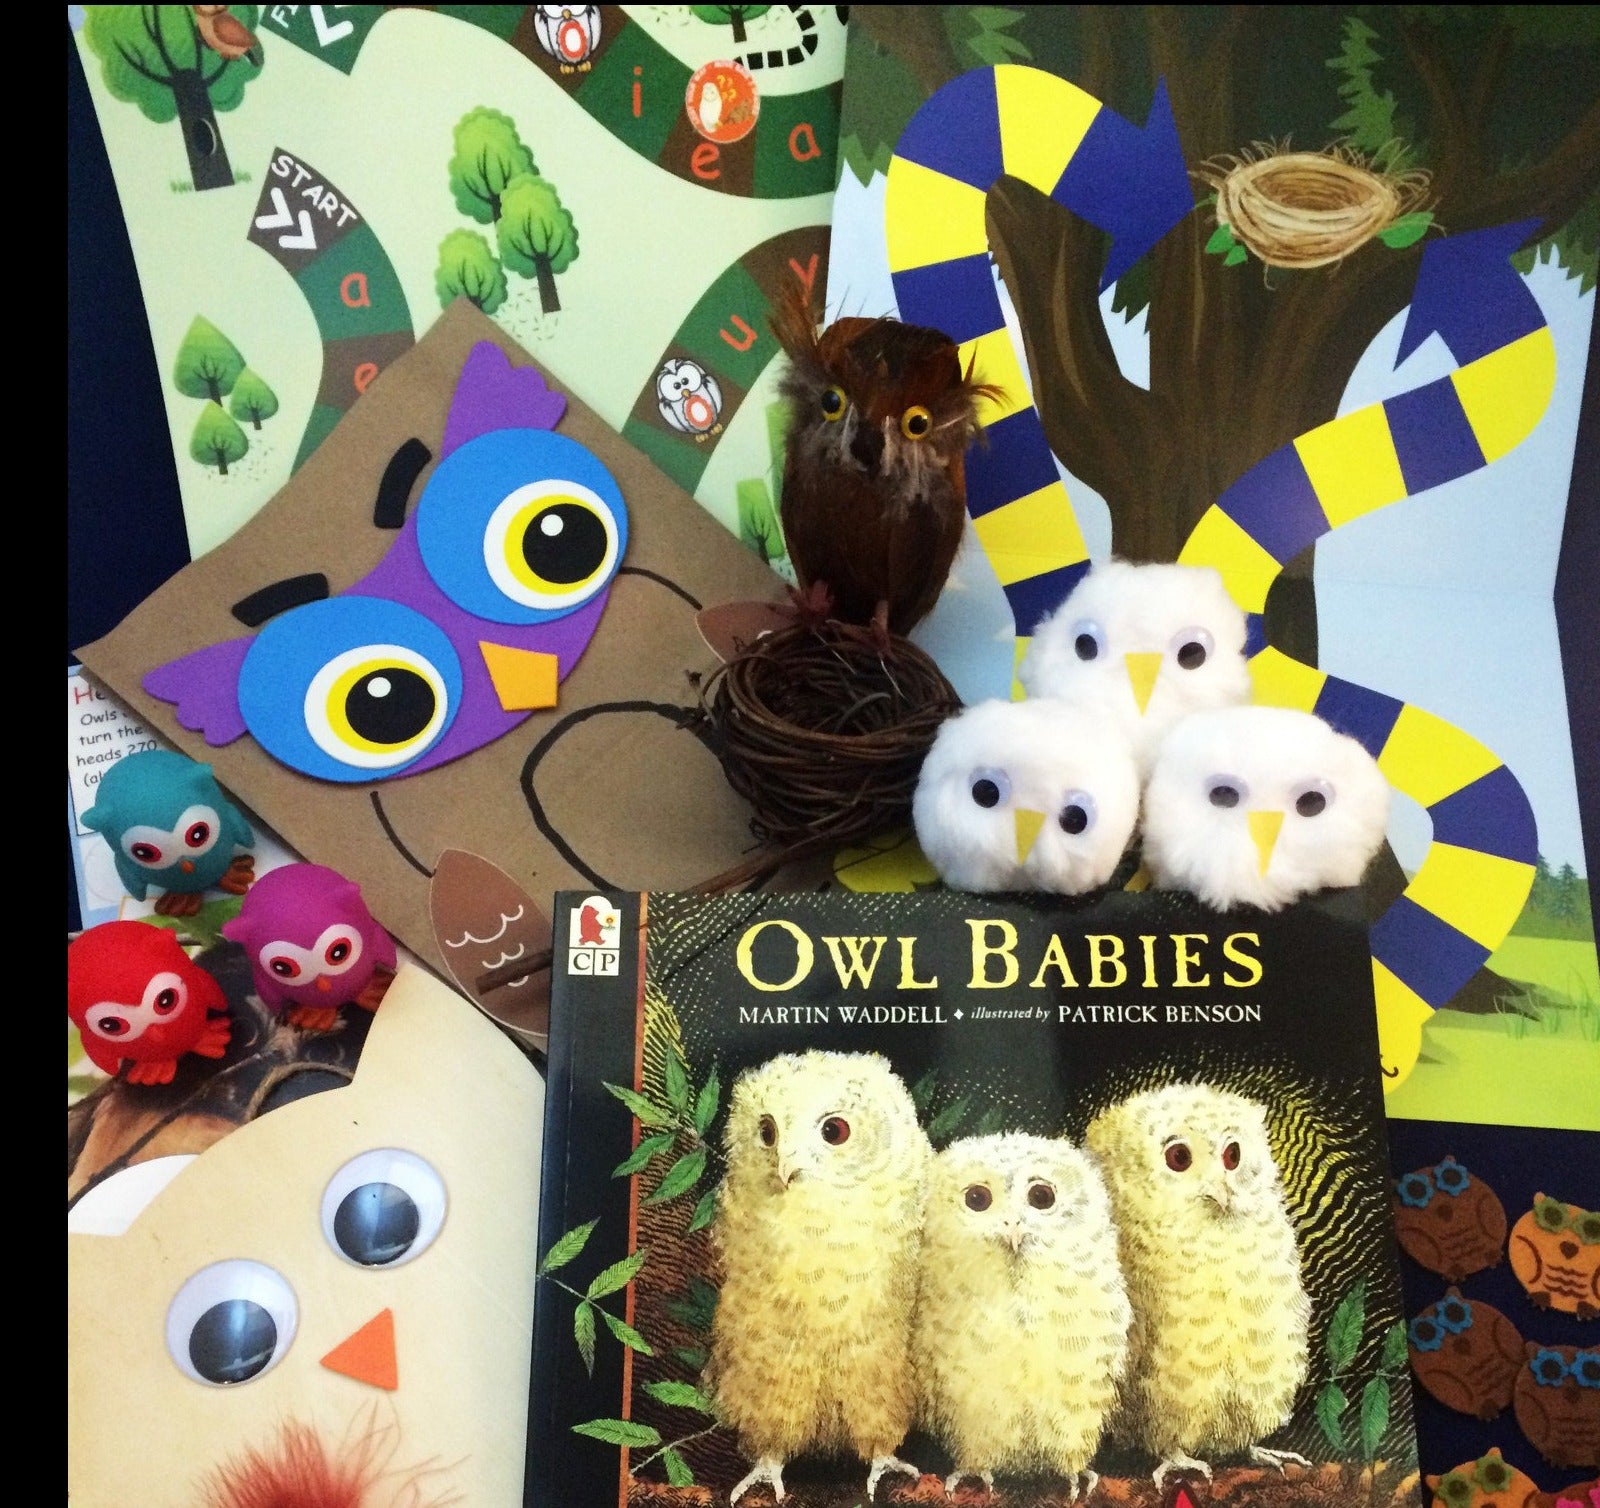 Fun and educational activities based on the book Owl Babies by Martin Waddell